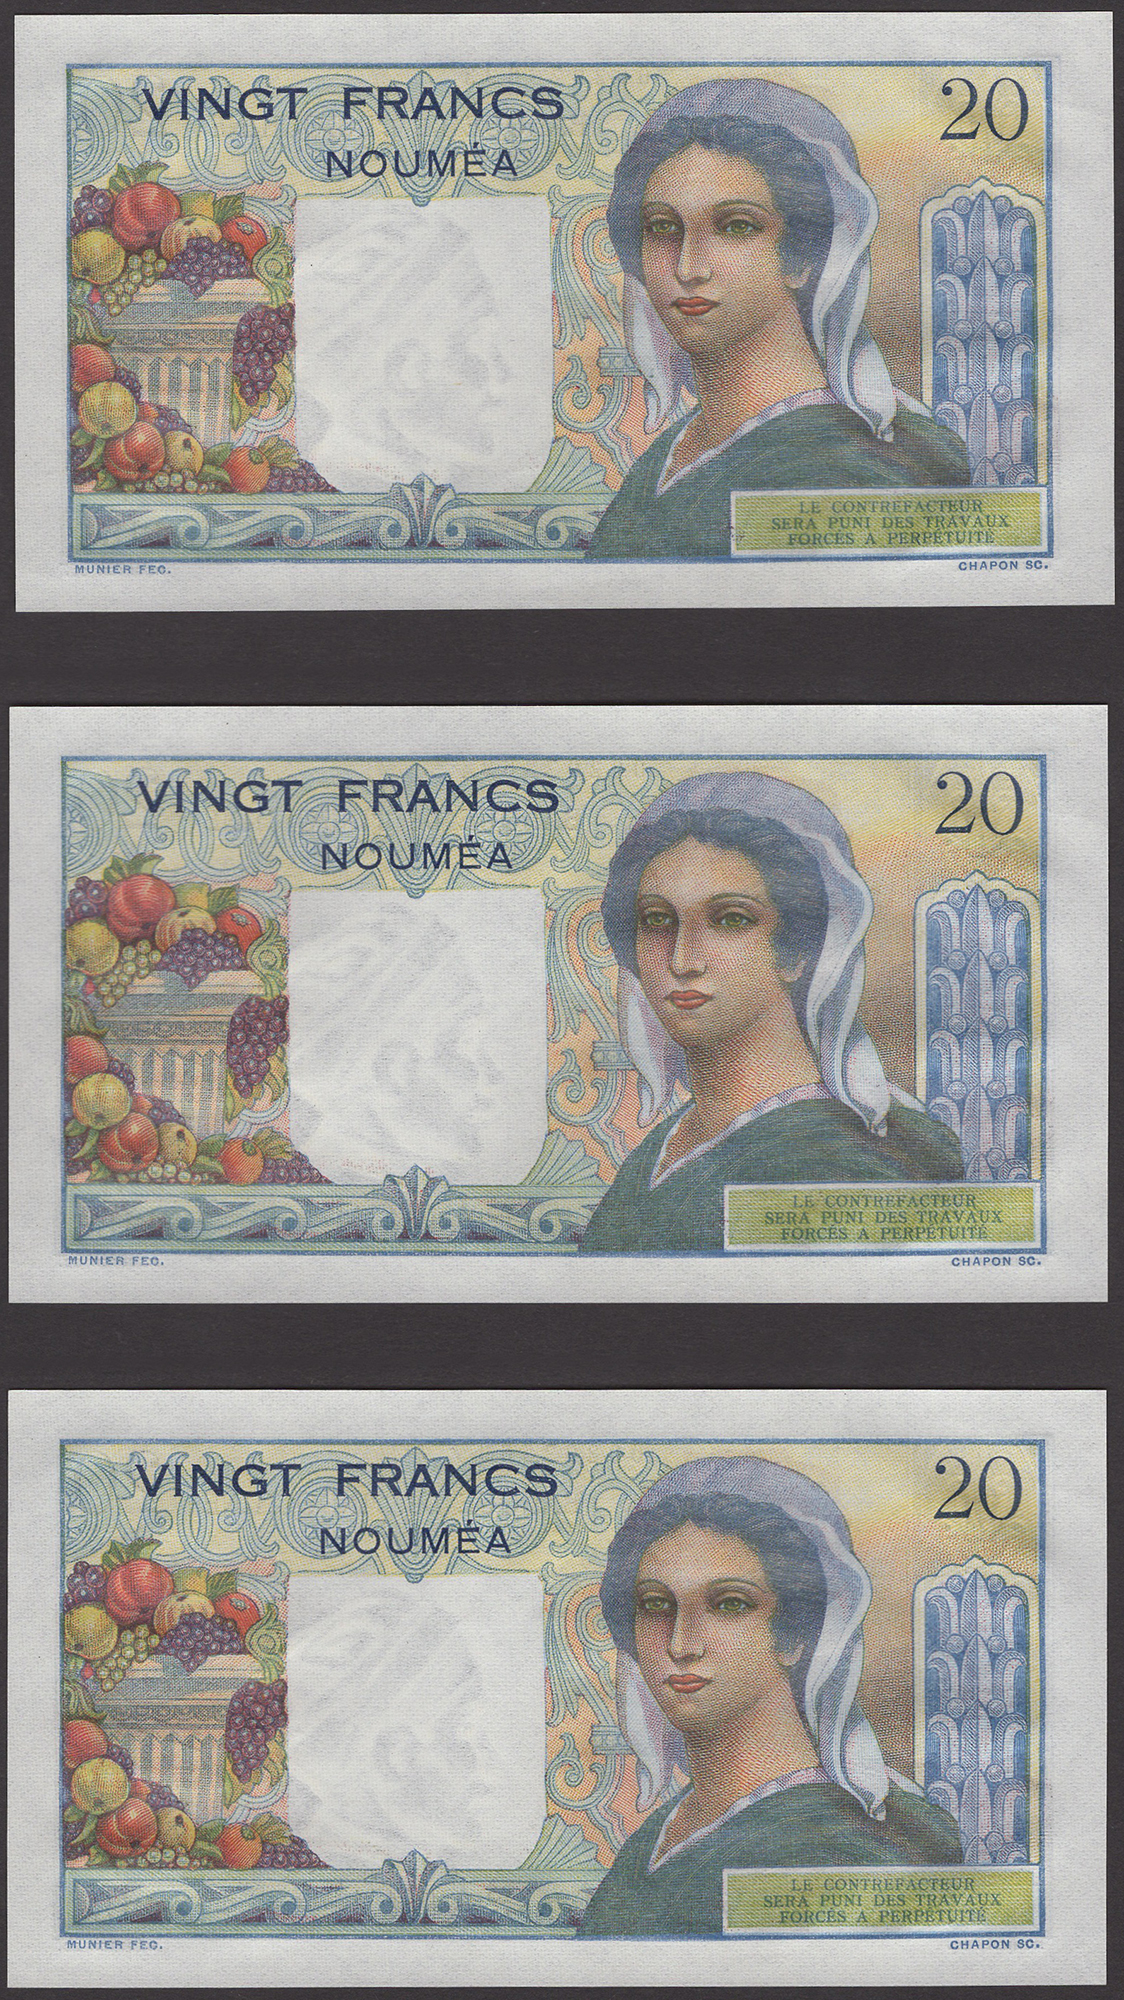 Banque de l'Indochine, New Caledonia, 20 Francs (5), ND (1951), serial number D.118 684-85... - Image 4 of 4